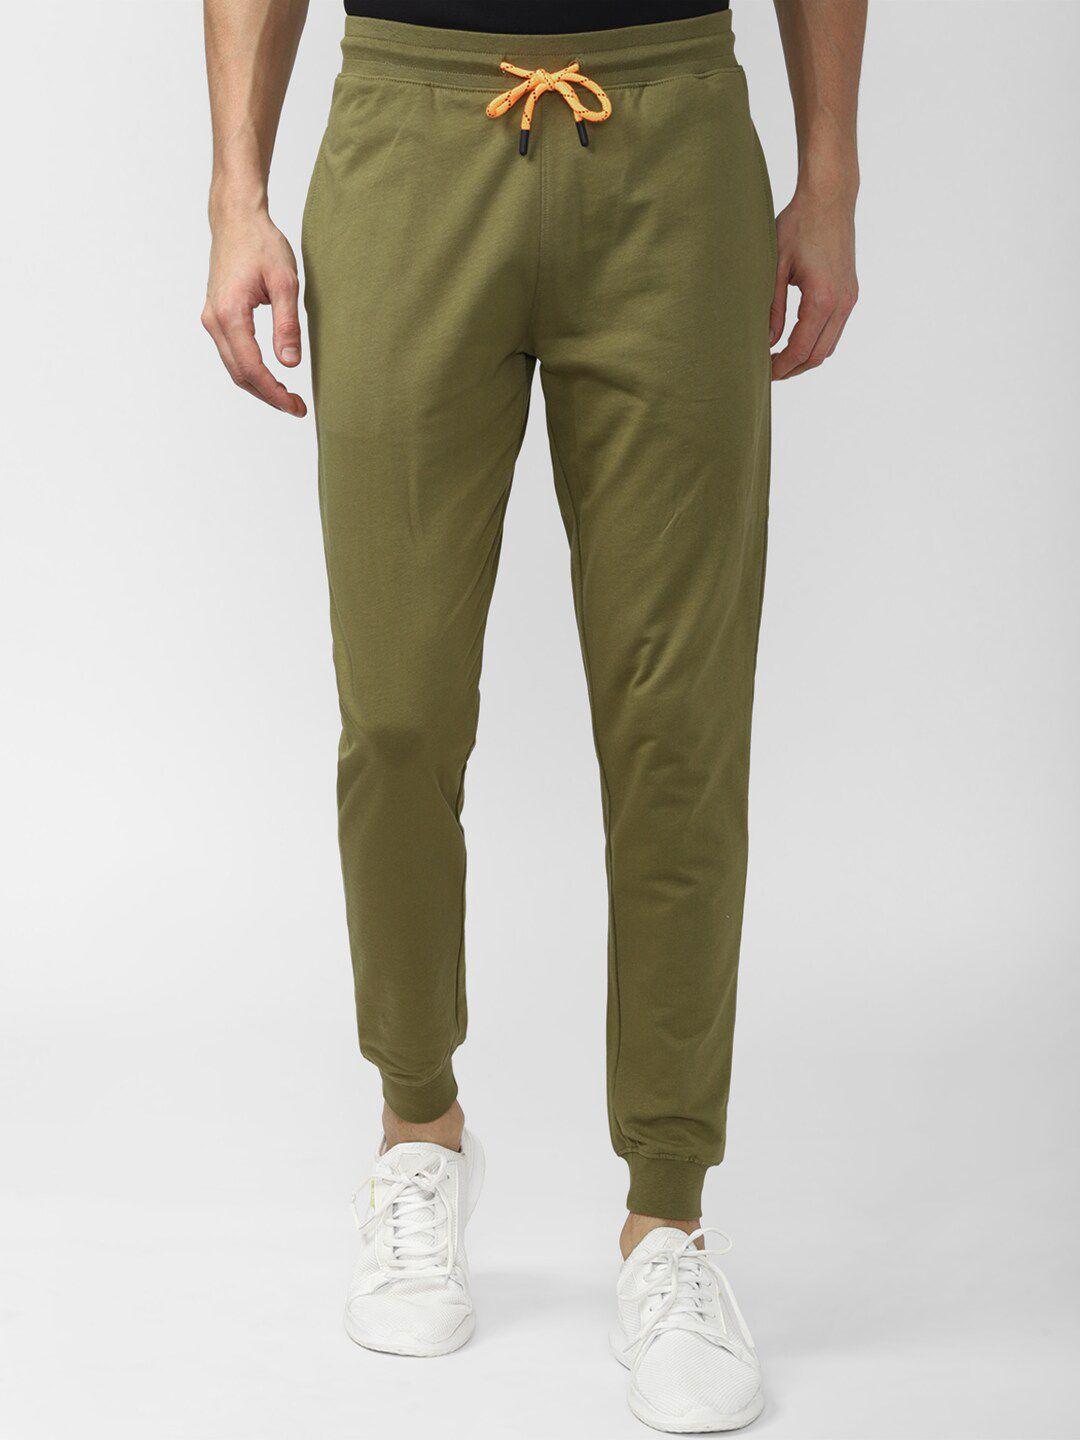 peter-england-men-olive-green-solid-cotton-joggers